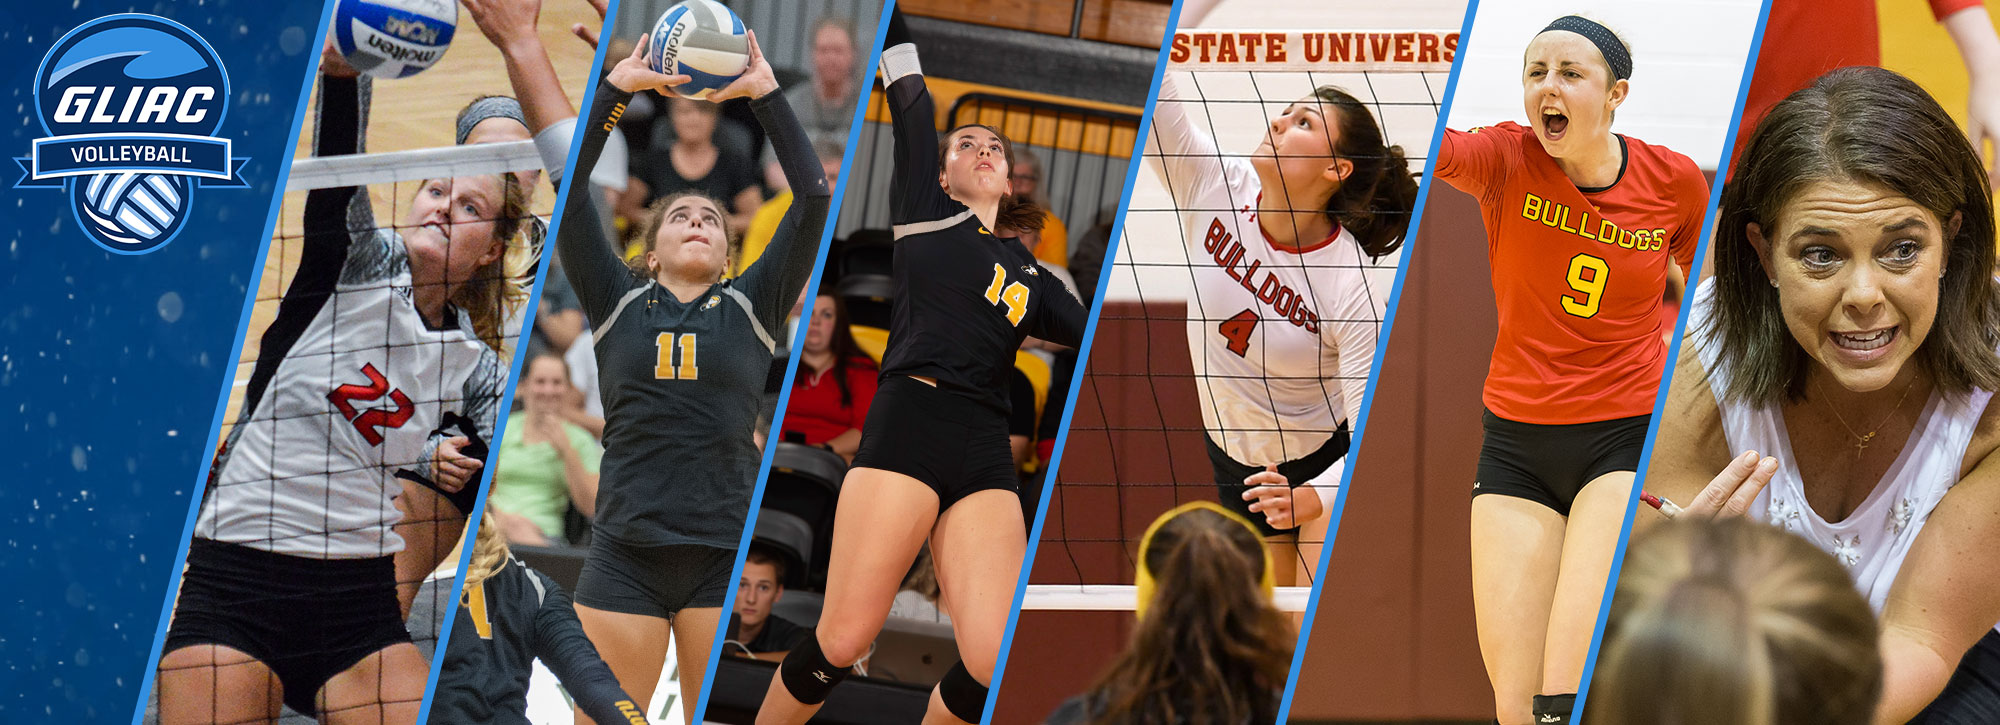 2018 All-GLIAC Volleyball Awards Unveiled; Ferris State's Cappel Selected Player of the Year